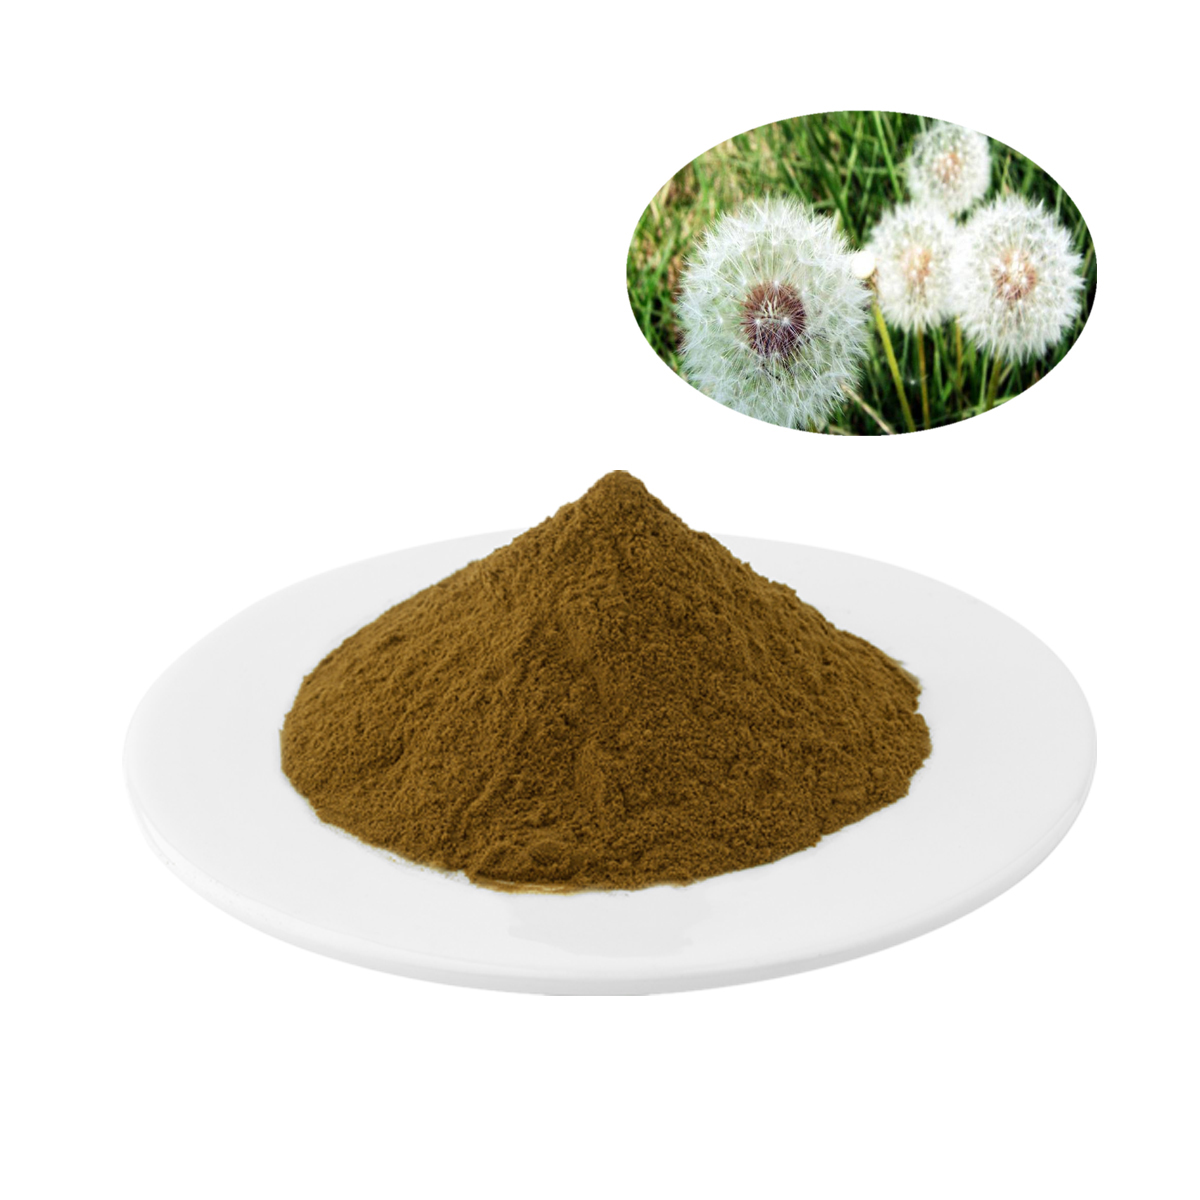 Dandelion  Extract                5%,10% Flavones Test by UV Dandelion Extract is used in inflammation and congestion of liver